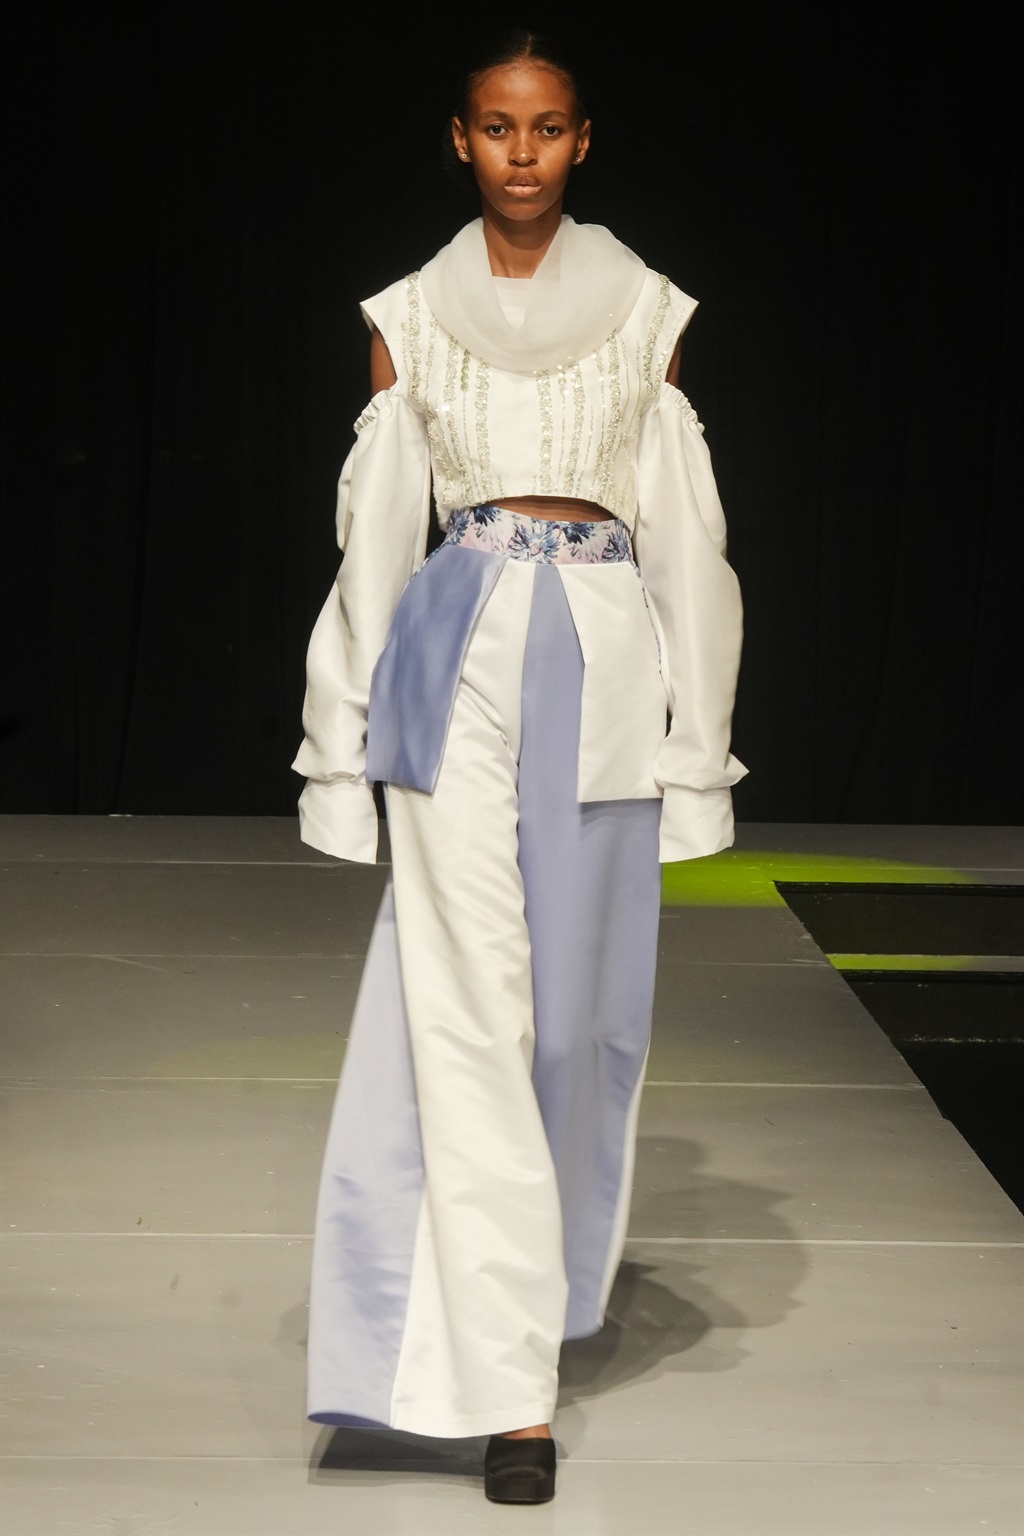 Photos | Soweto Fashion Week brings local designs to the fore | City Press